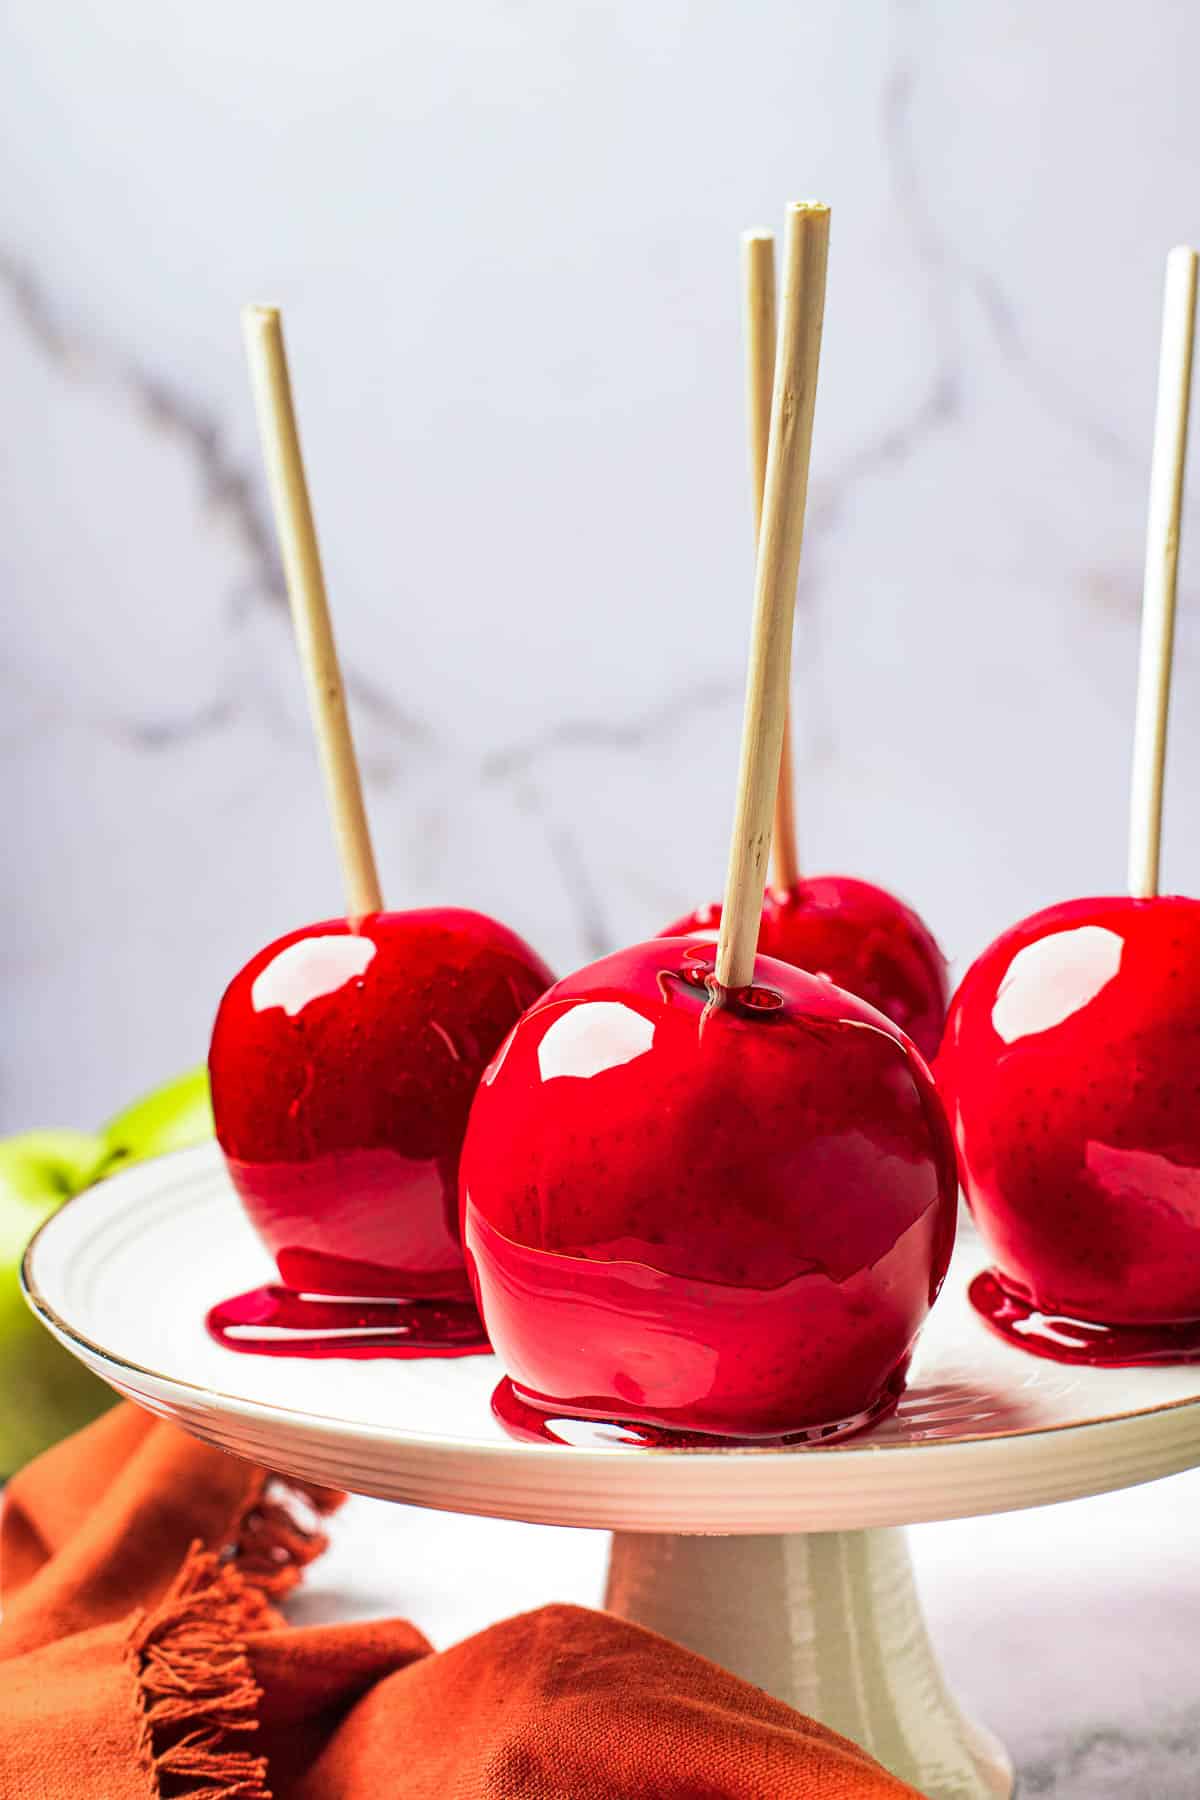 A white cake stand with four candied apples displayed on it.